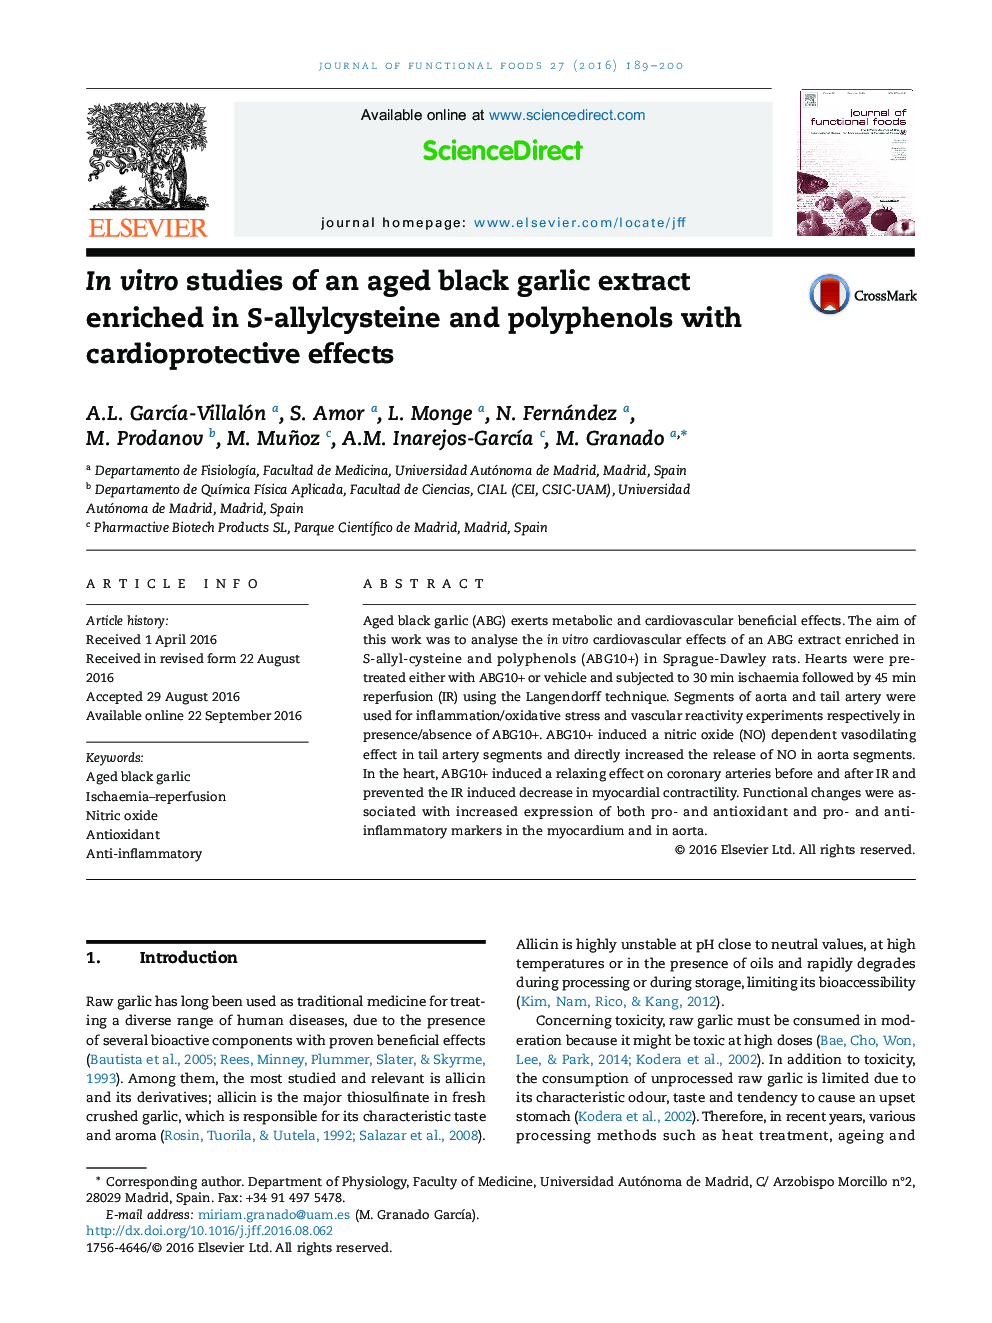 In vitro studies of an aged black garlic extract enriched in S-allylcysteine and polyphenols with cardioprotective effects